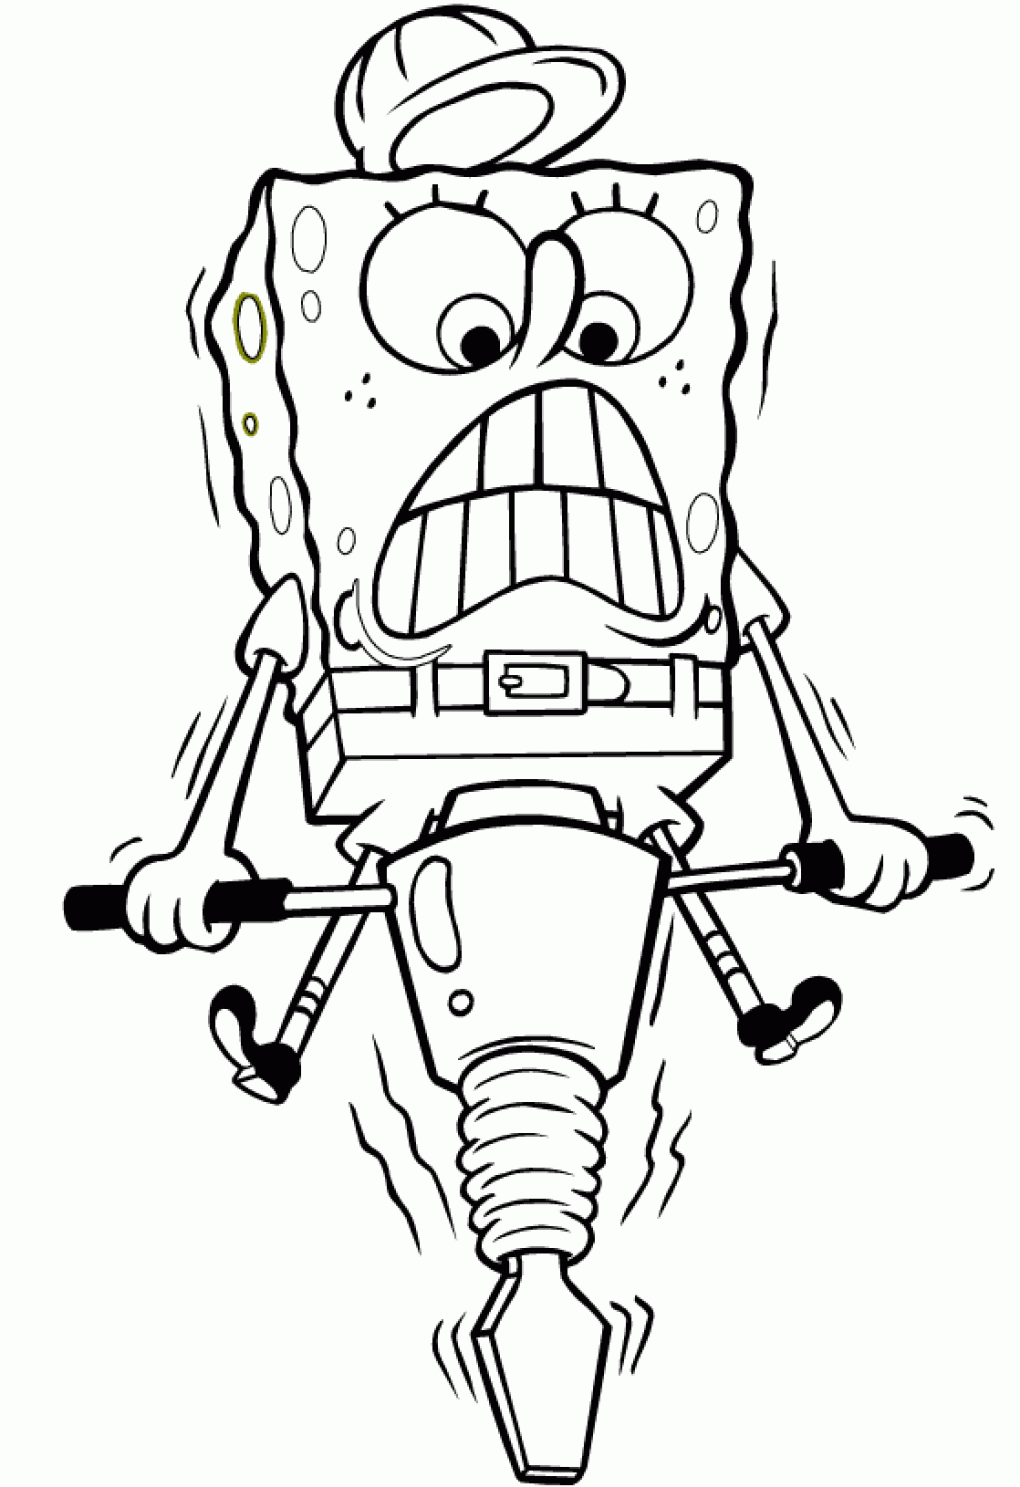 Funny Spongebob Coloring Pages